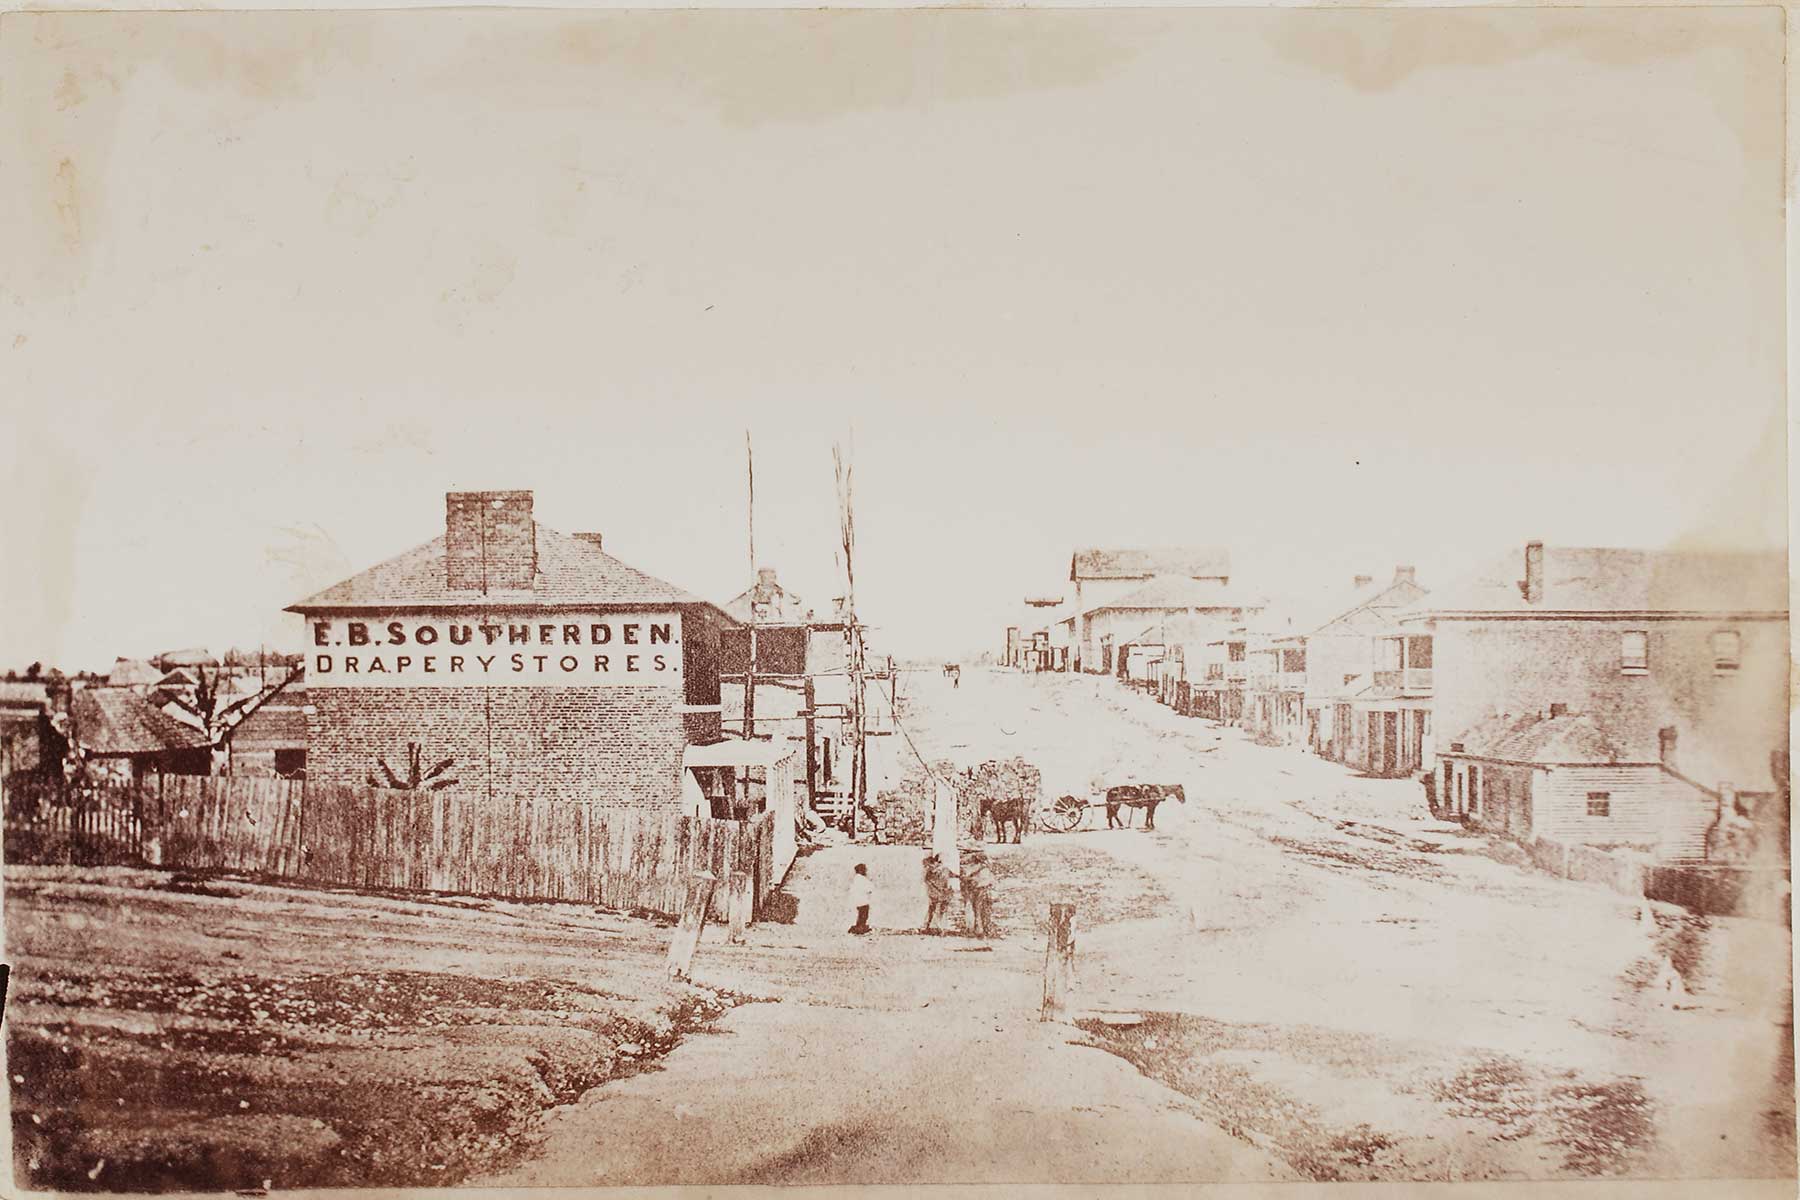 Brisbane in 1859 showing E.B. Southerden Drapery Stores, Queen Street, 1859